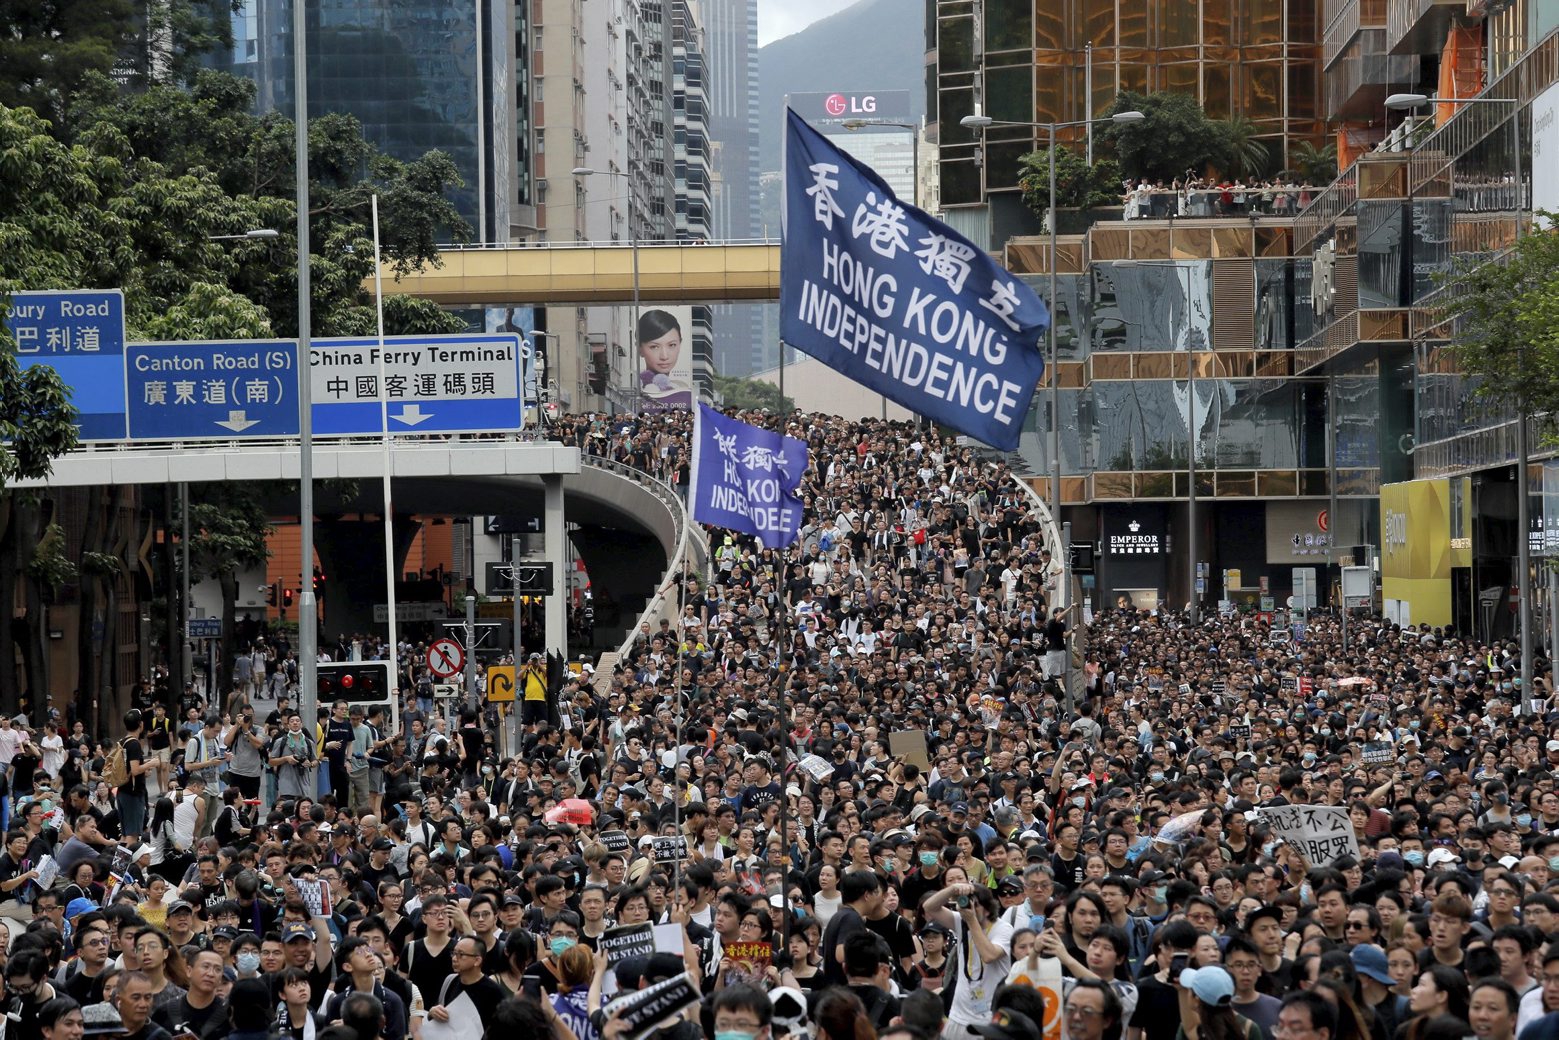 Protesters march with a flag calling for Hong Kong independence in Hong Kong on Sunday, July 7, 2019. Thousands of people, many wearing black shirts and some carrying British flags, were marching in Hong Kong on Sunday, targeting a mainland Chinese audience as a month-old protest movement showed no signs of abating. (AP Photo/Kin Cheung) APTOPIX Hong Kong Protests